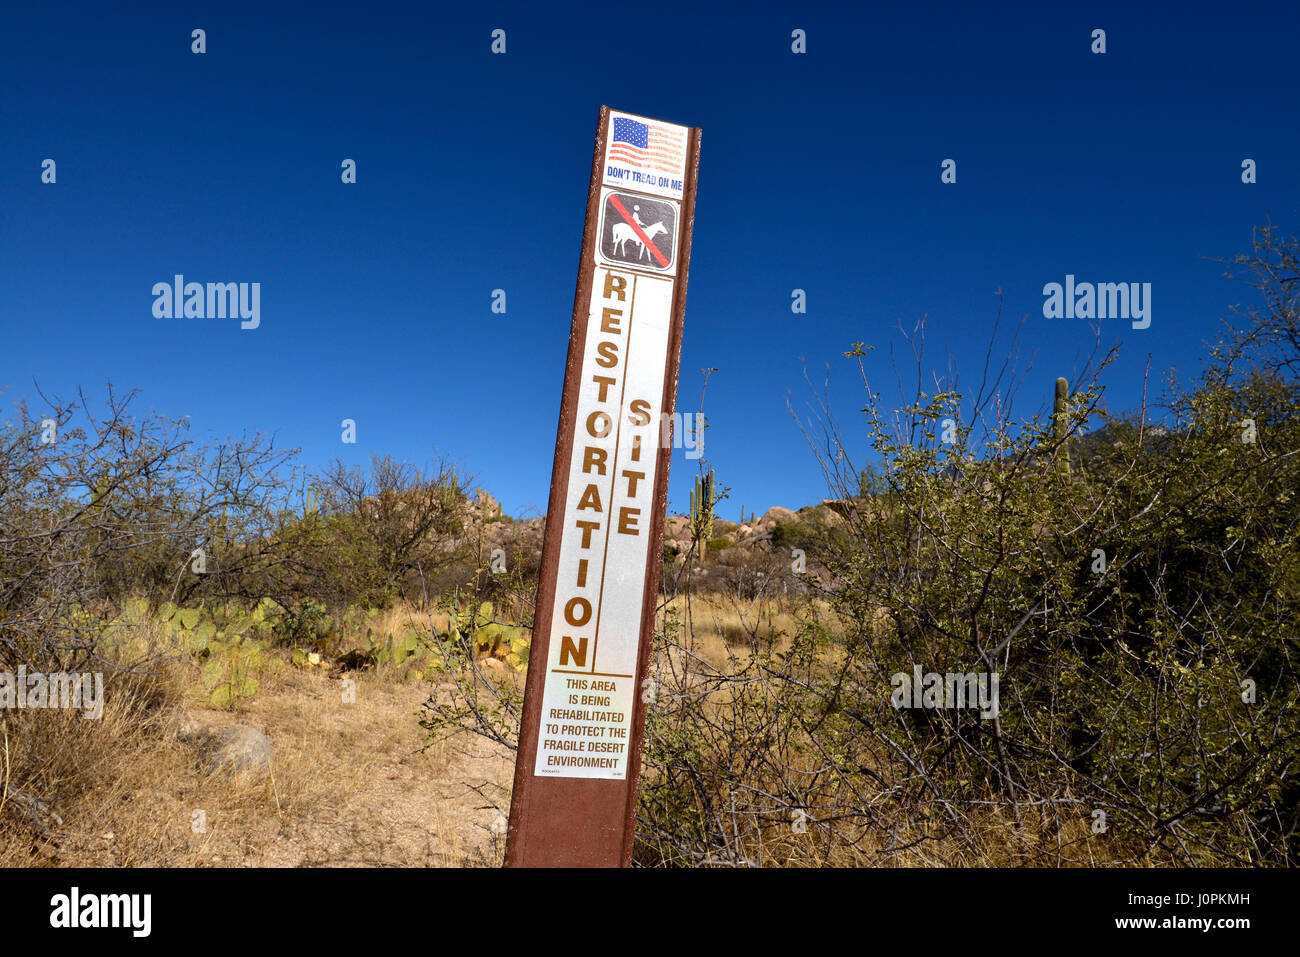 A sign indicates that an area is restricted for restoration in the foothills of the Santa Catalina Mountains, Sonoran Desert Coronado National Forest, Stock Photo